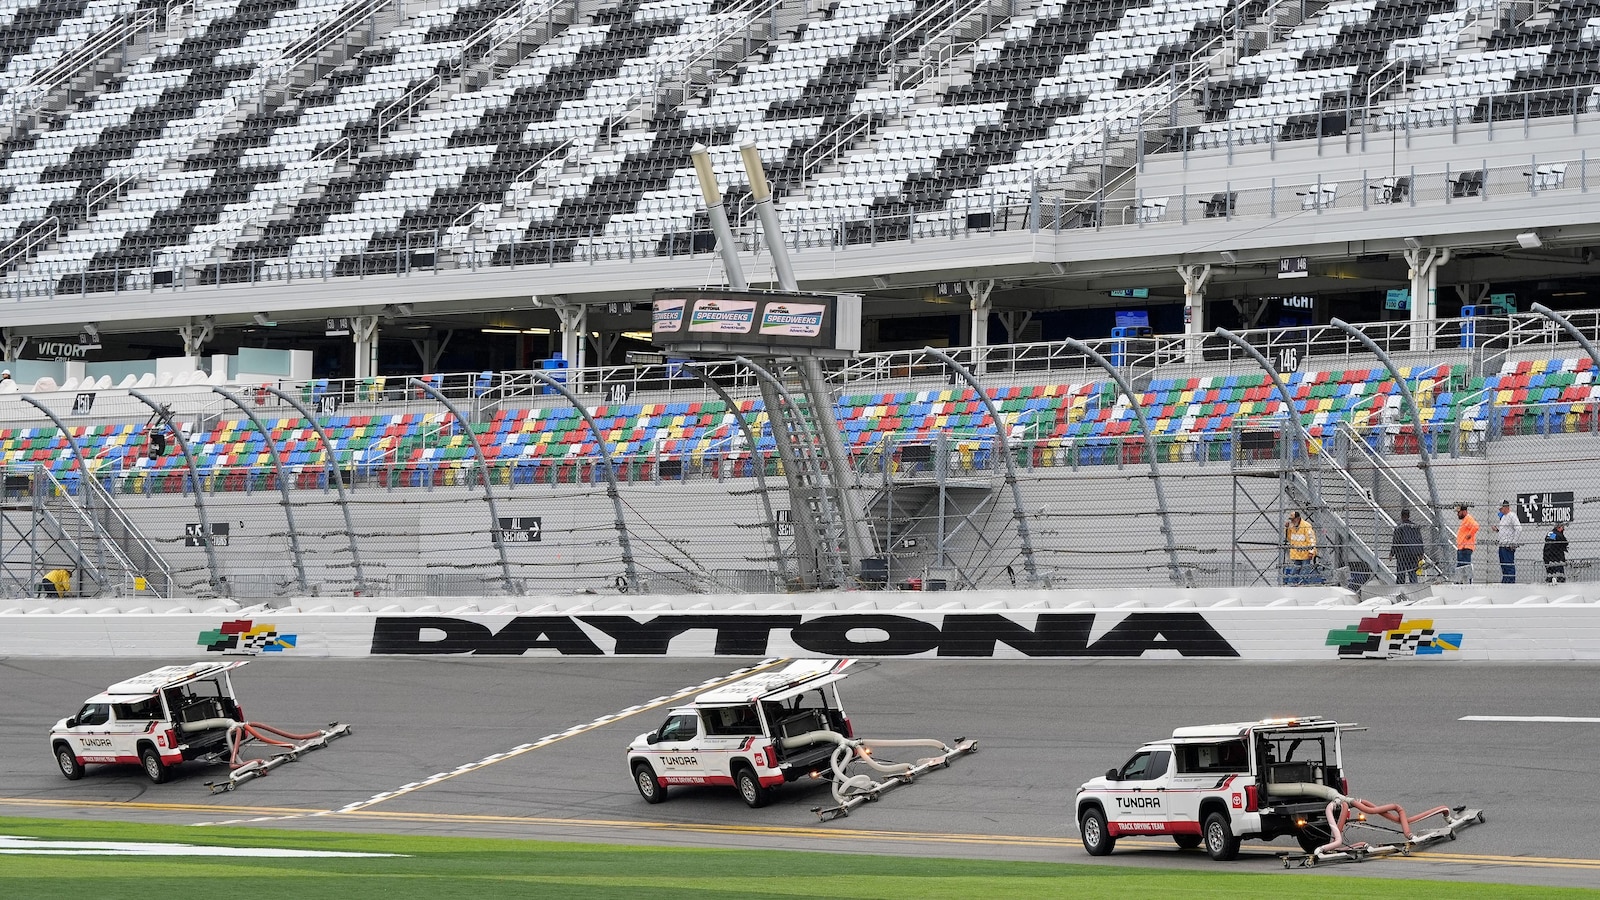 NASCAR's Daytona 500 Commences One Day Behind Schedule Due to Persistent Rainfall